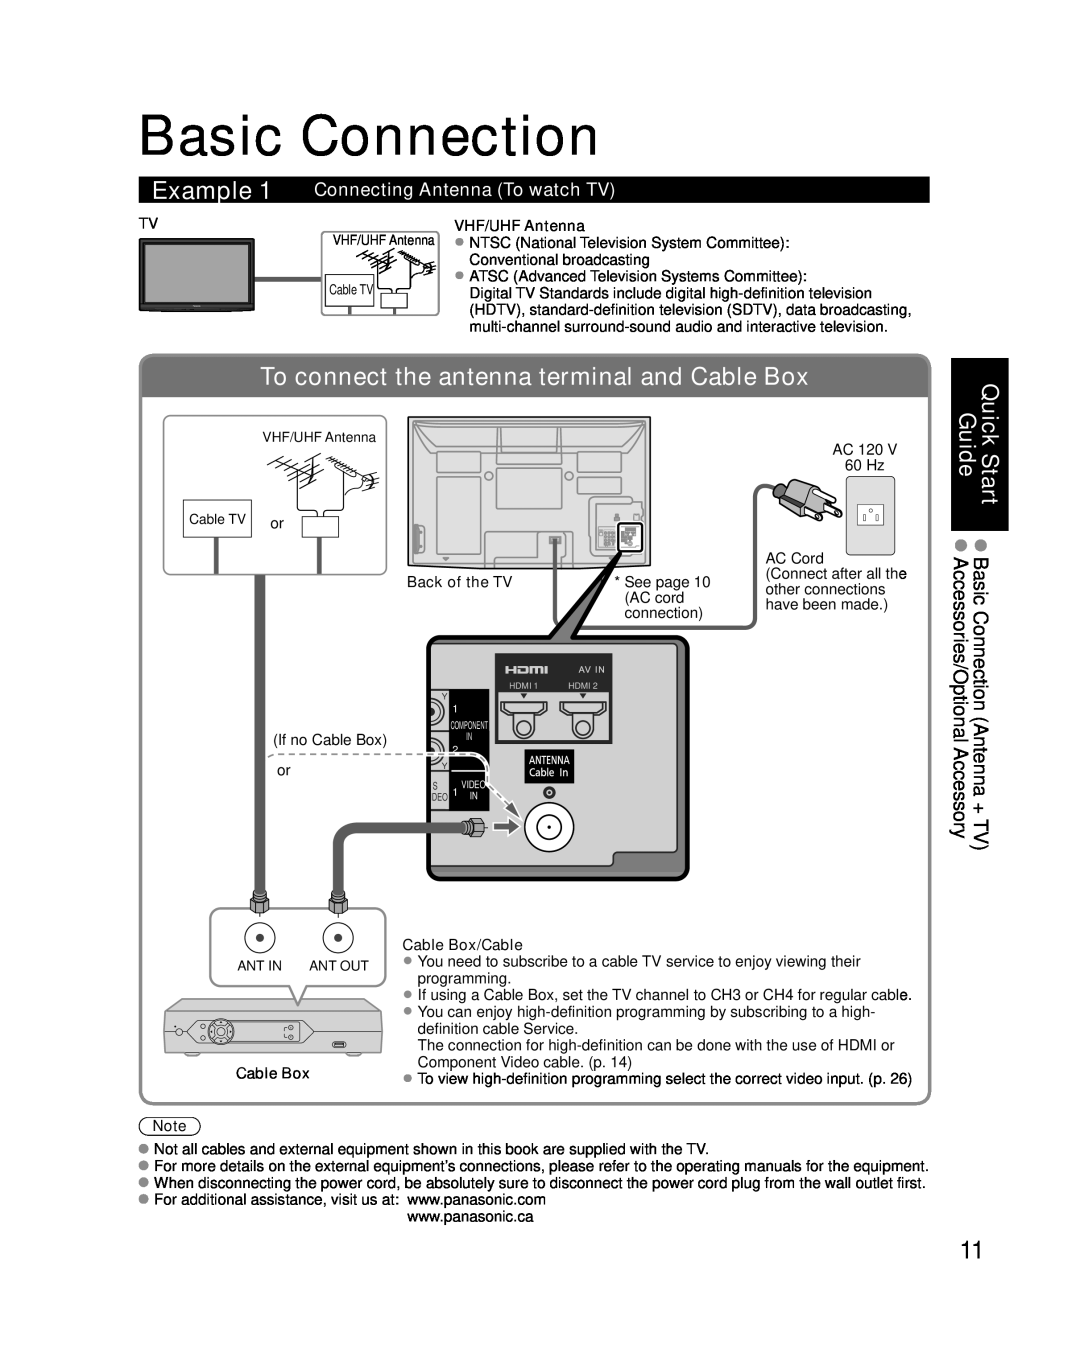 Panasonic TC-P54G10, TC-P50G10 Basic Connection, Example, To connect the antenna terminal and Cable Box, If no Cable Box 